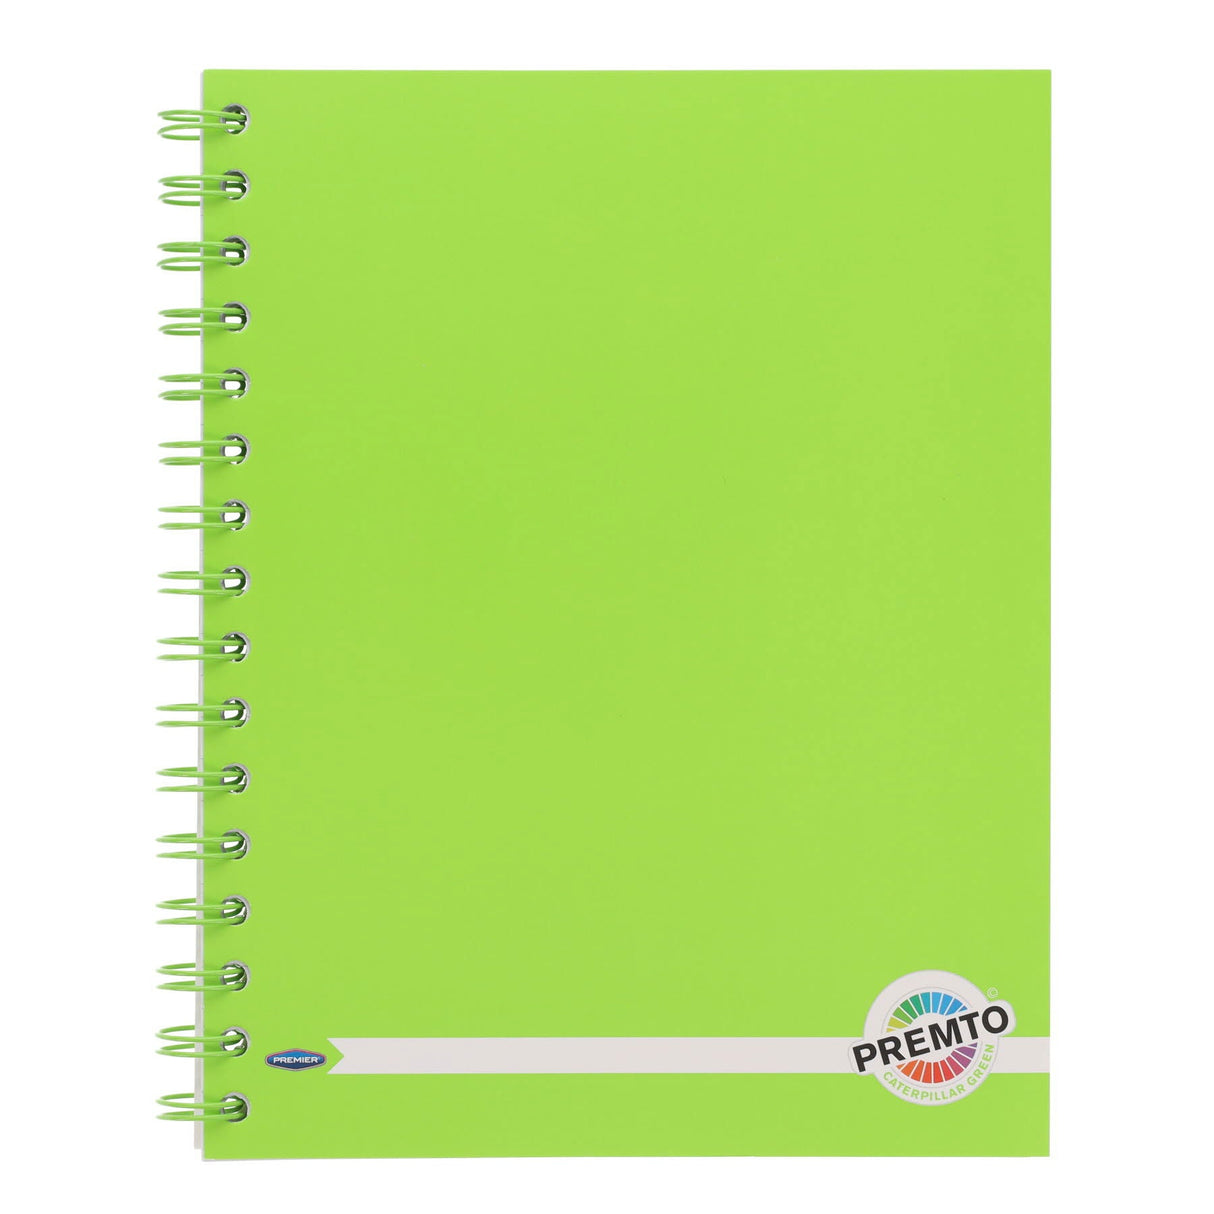 Premto A5 Wiro Notebook - 200 Pages - Caterpillar Green-A5 Notebooks- Buy Online at Stationery Shop UK